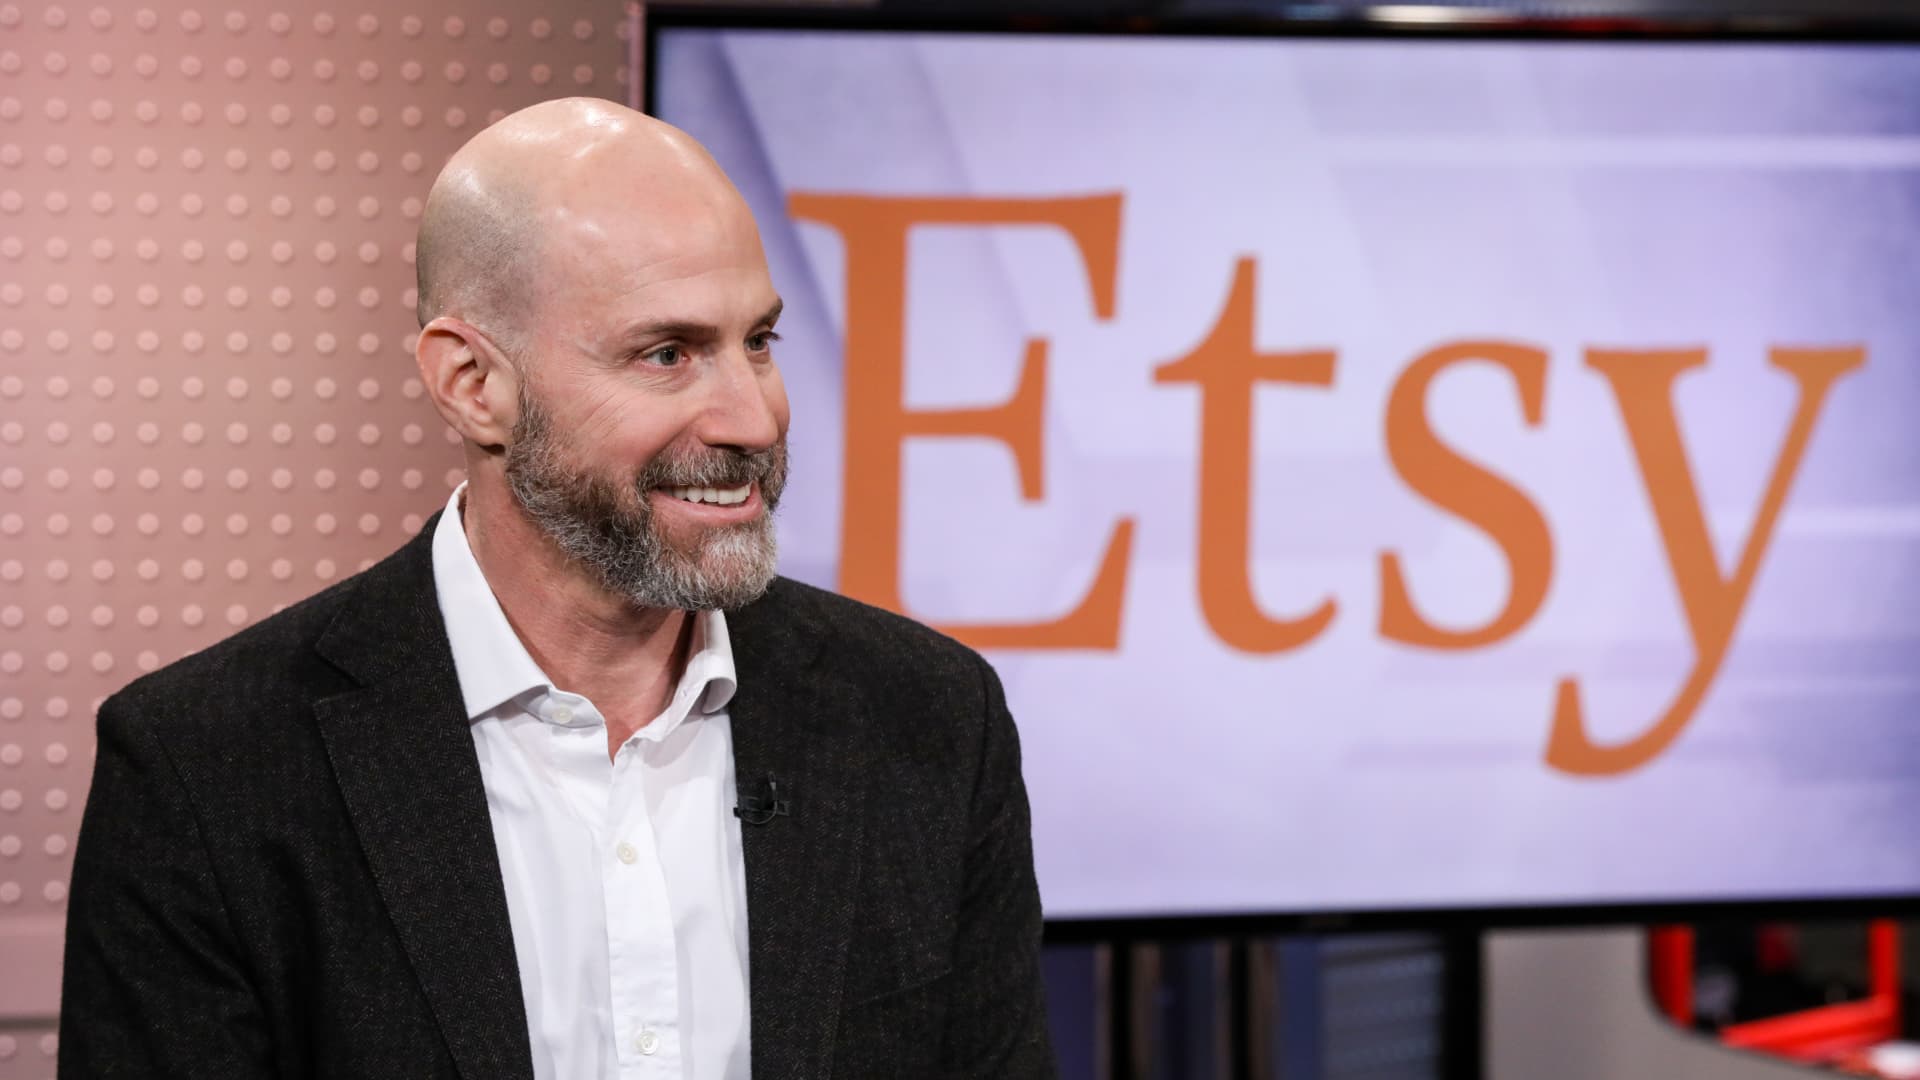 Etsy shares pop on revenue beat, rosy guidance